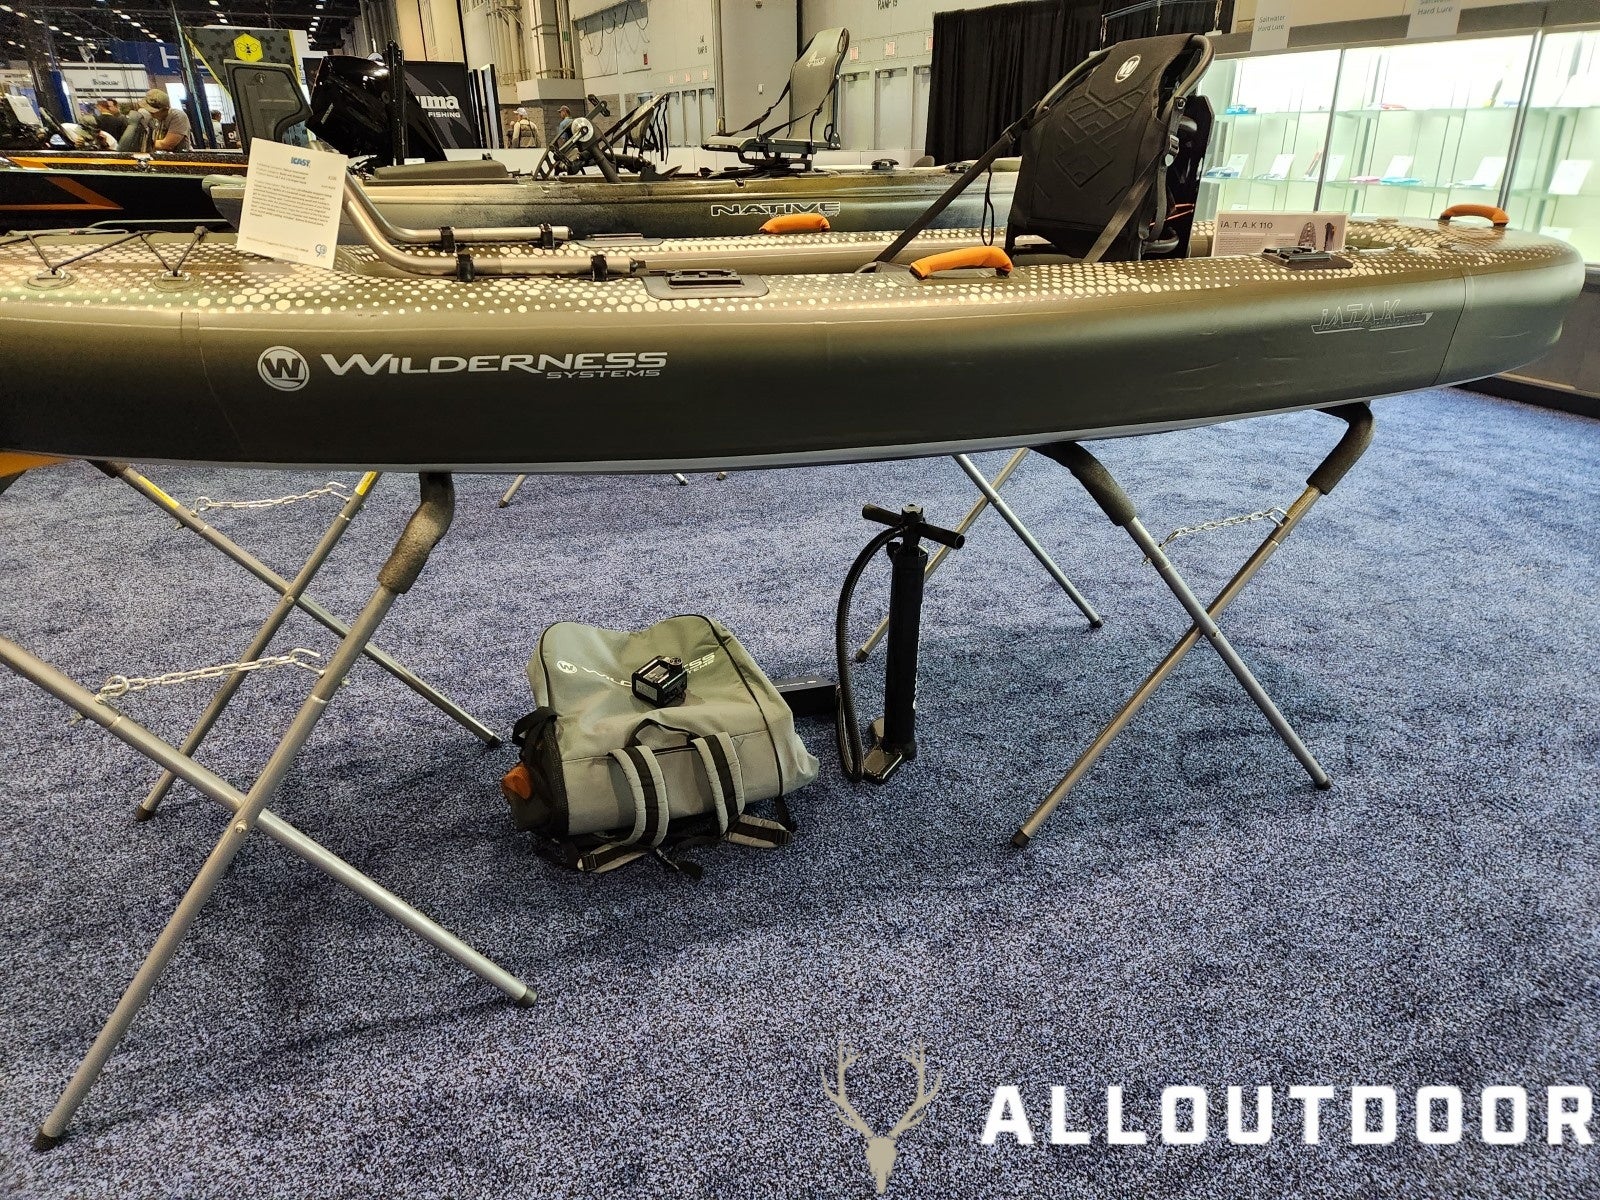 ICAST 2023] The iA.T.A.K 110 Angler Kayak from Pelican International